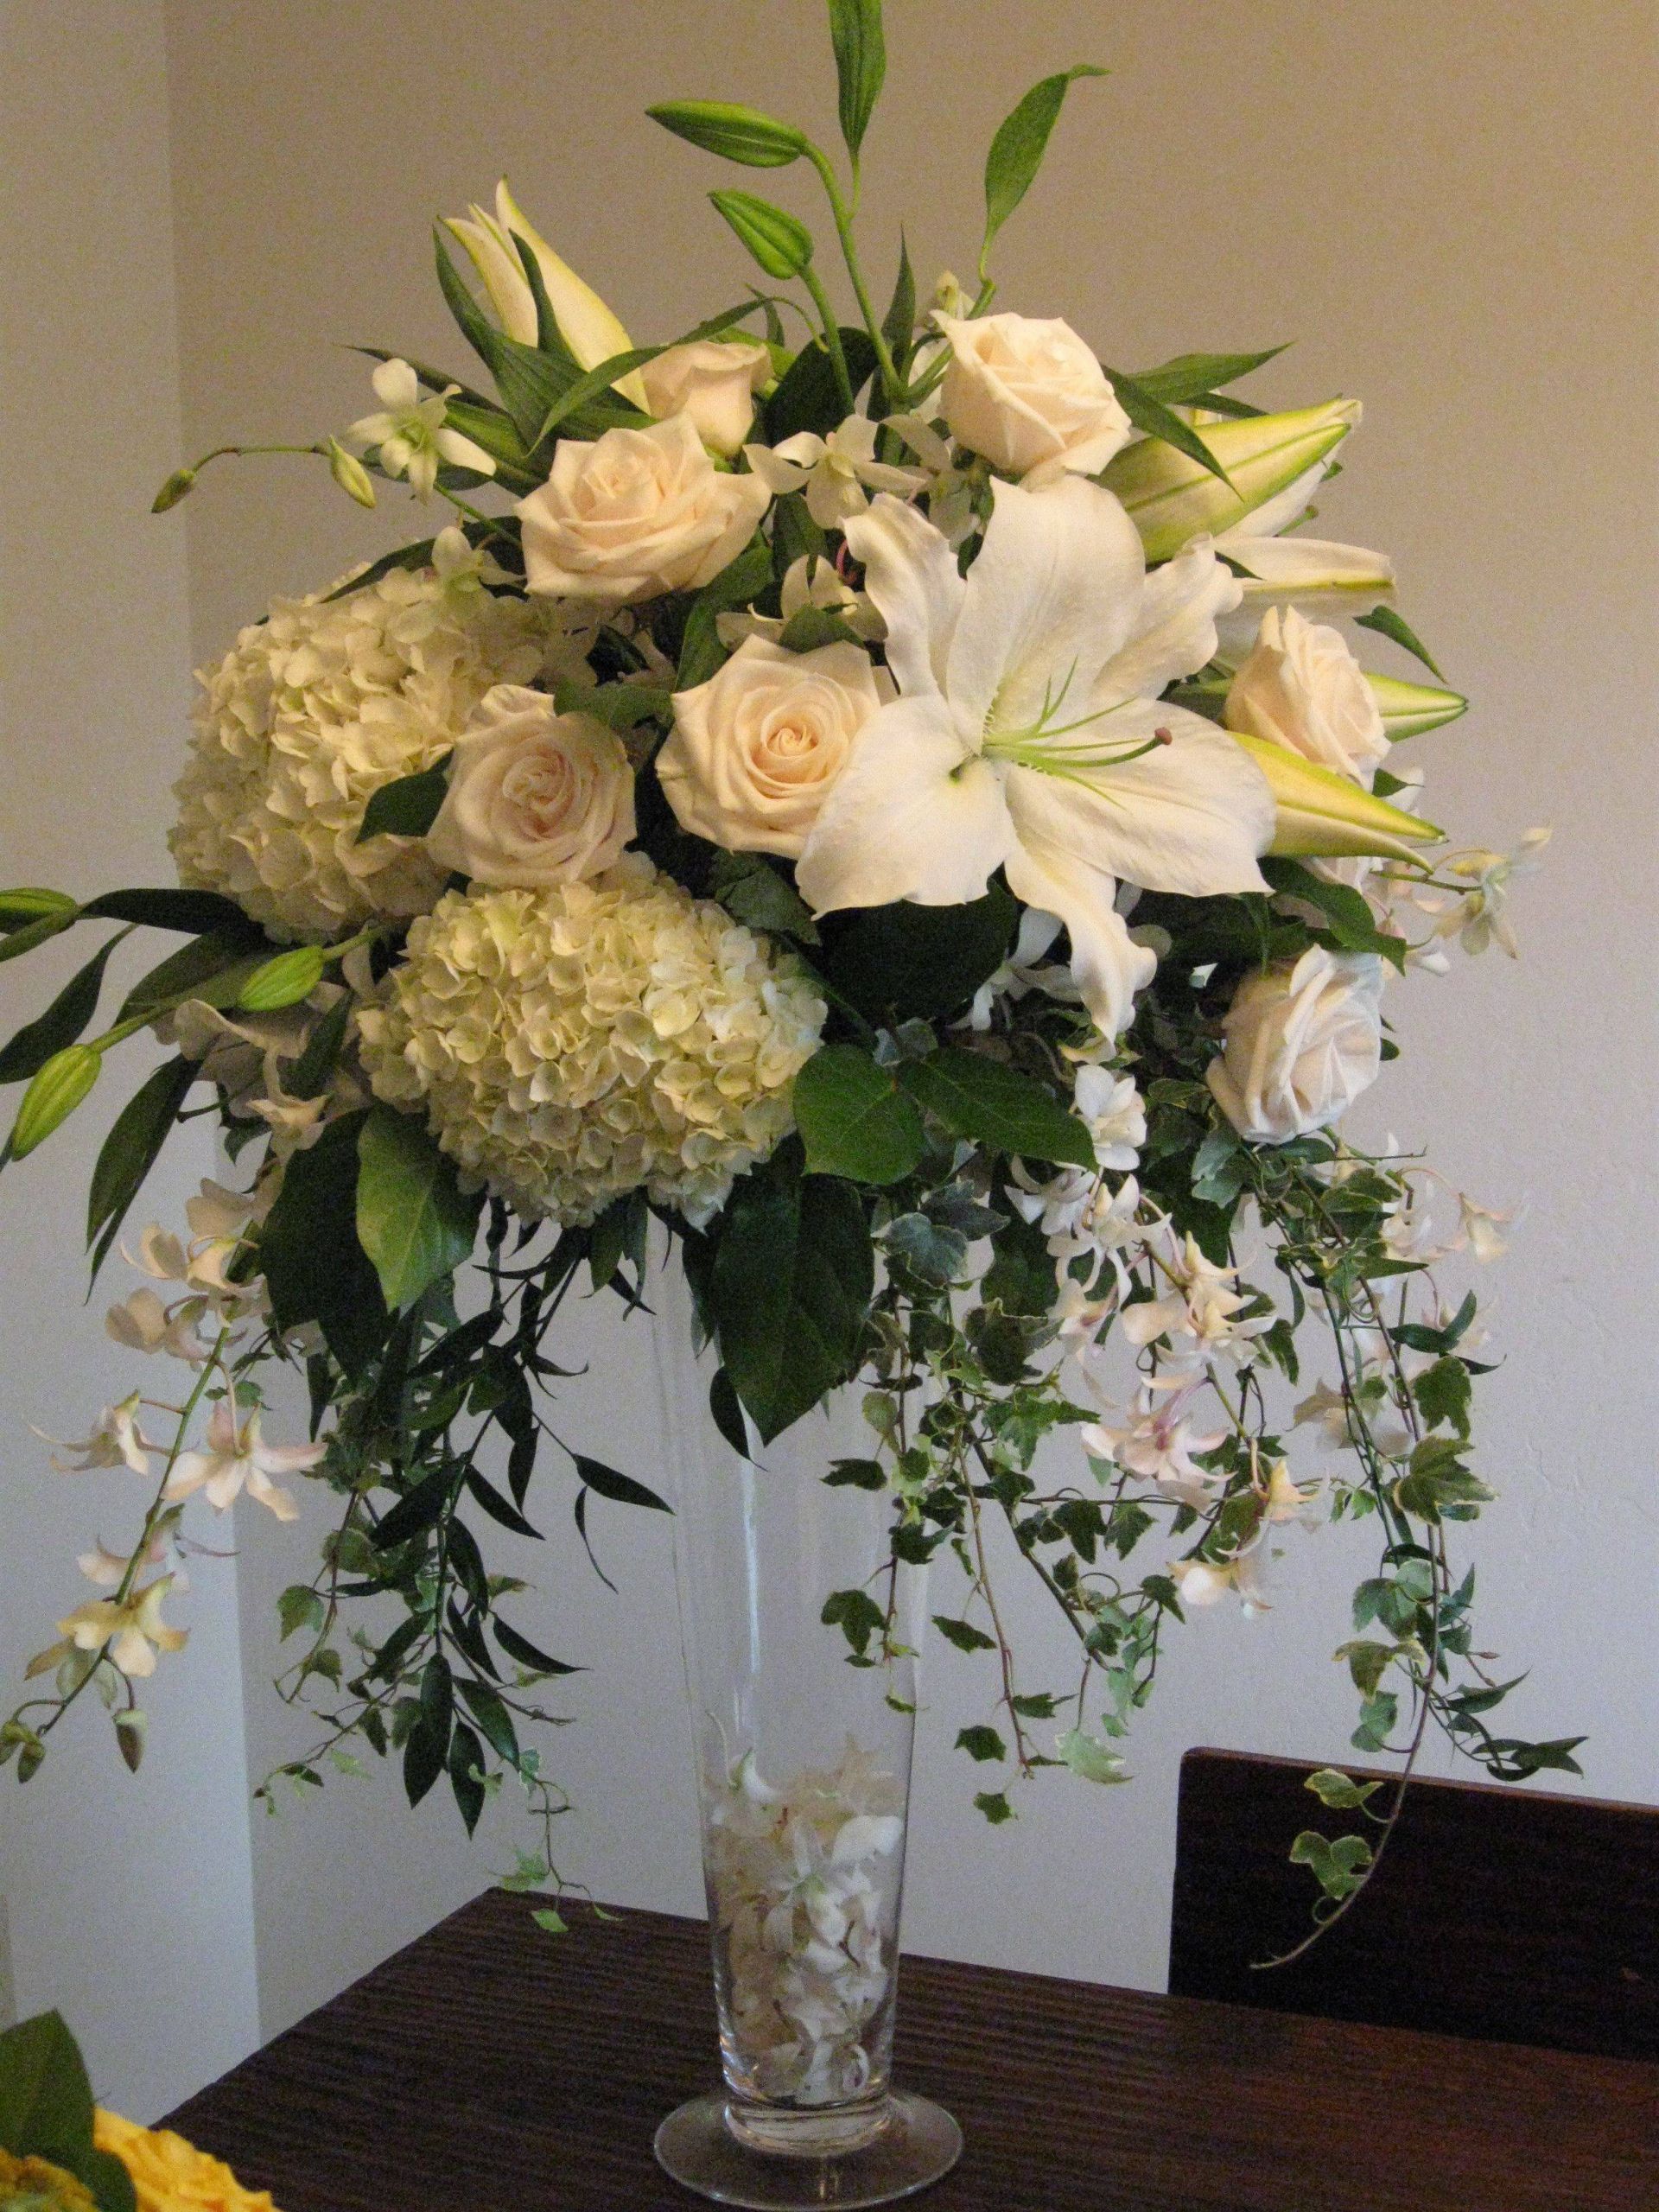 24 inch trumpet vases wholesale of centerpiece white roses hydrangea orchids tall vendela the inside centerpiece white roses hydrangea orchids tall vendela the blue orchid dendrobium ivy cas